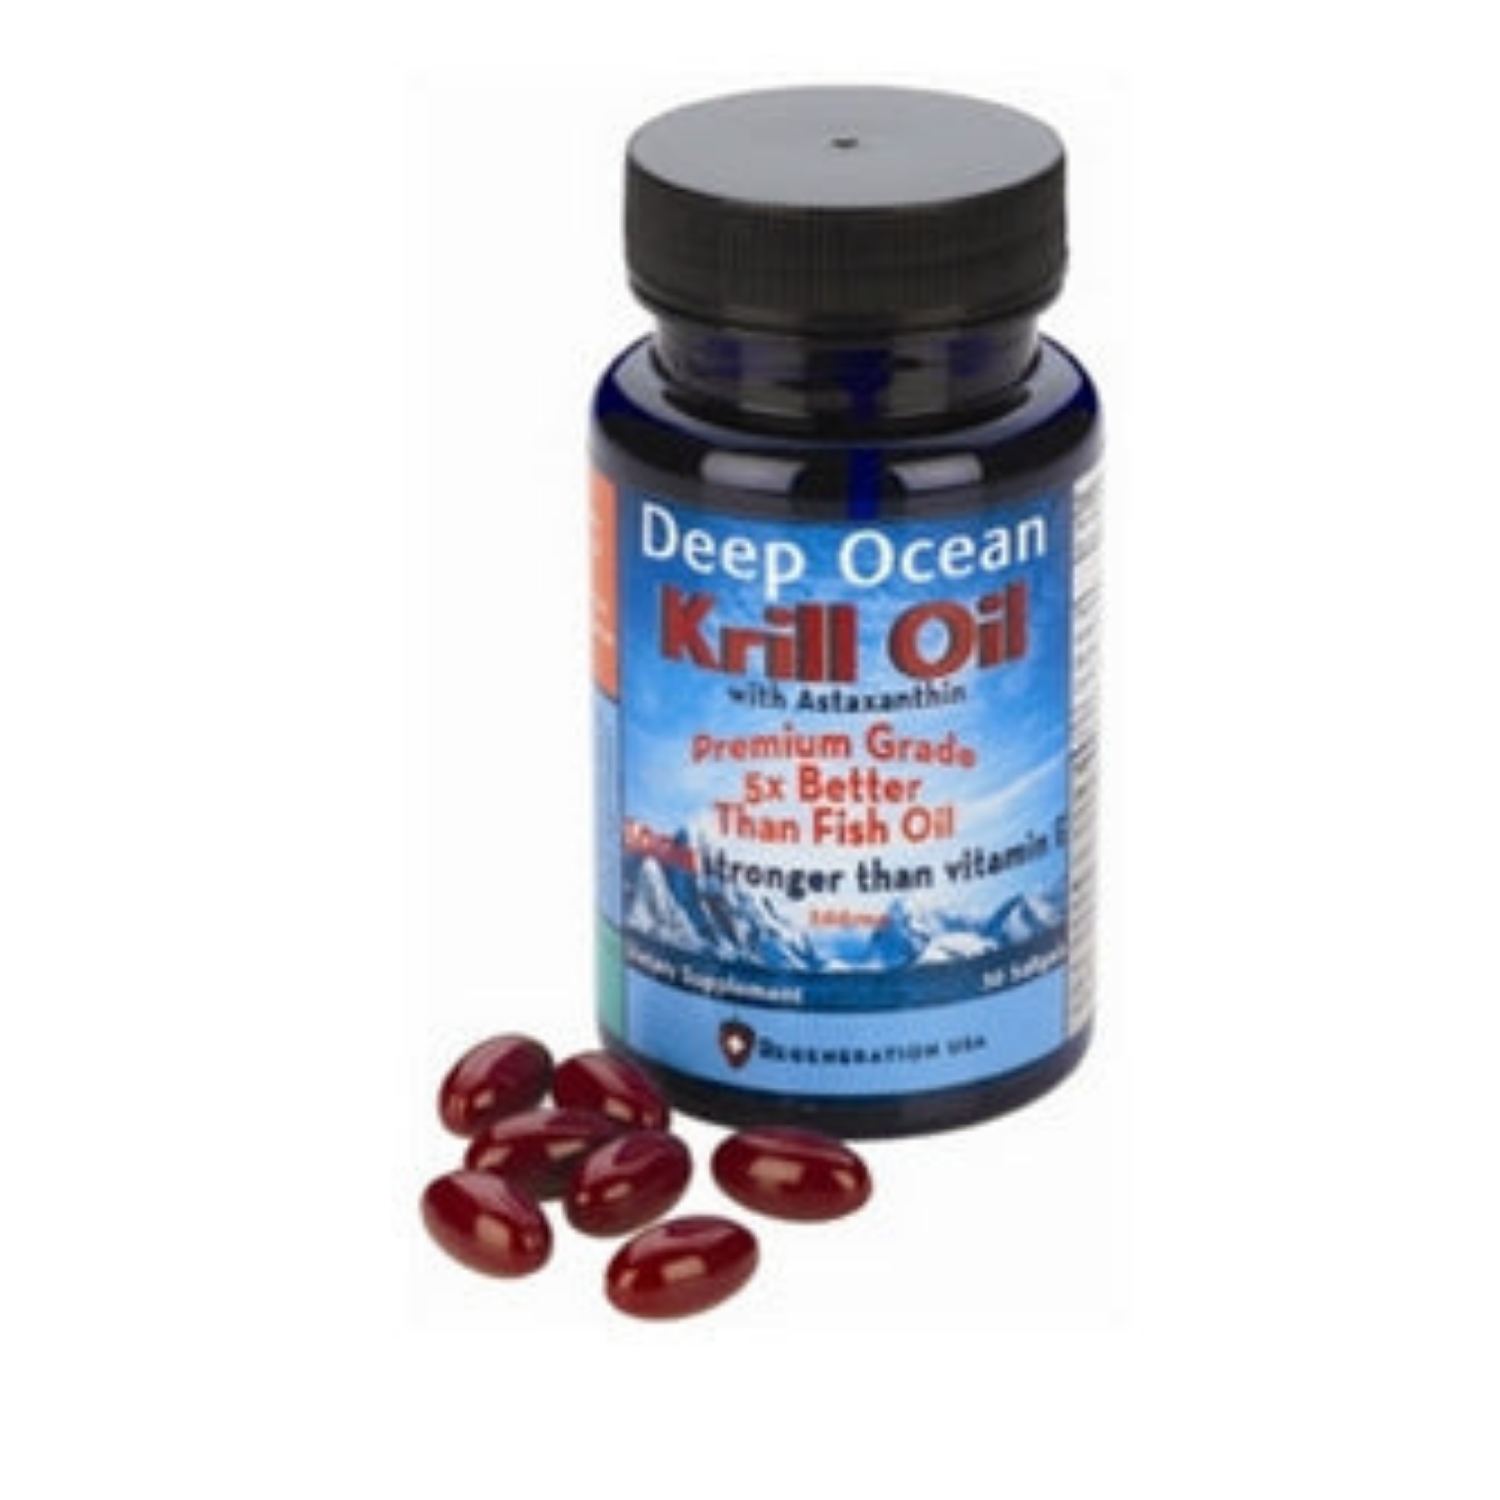 Krill Oil with Astaxanthin 5x better than fish oil